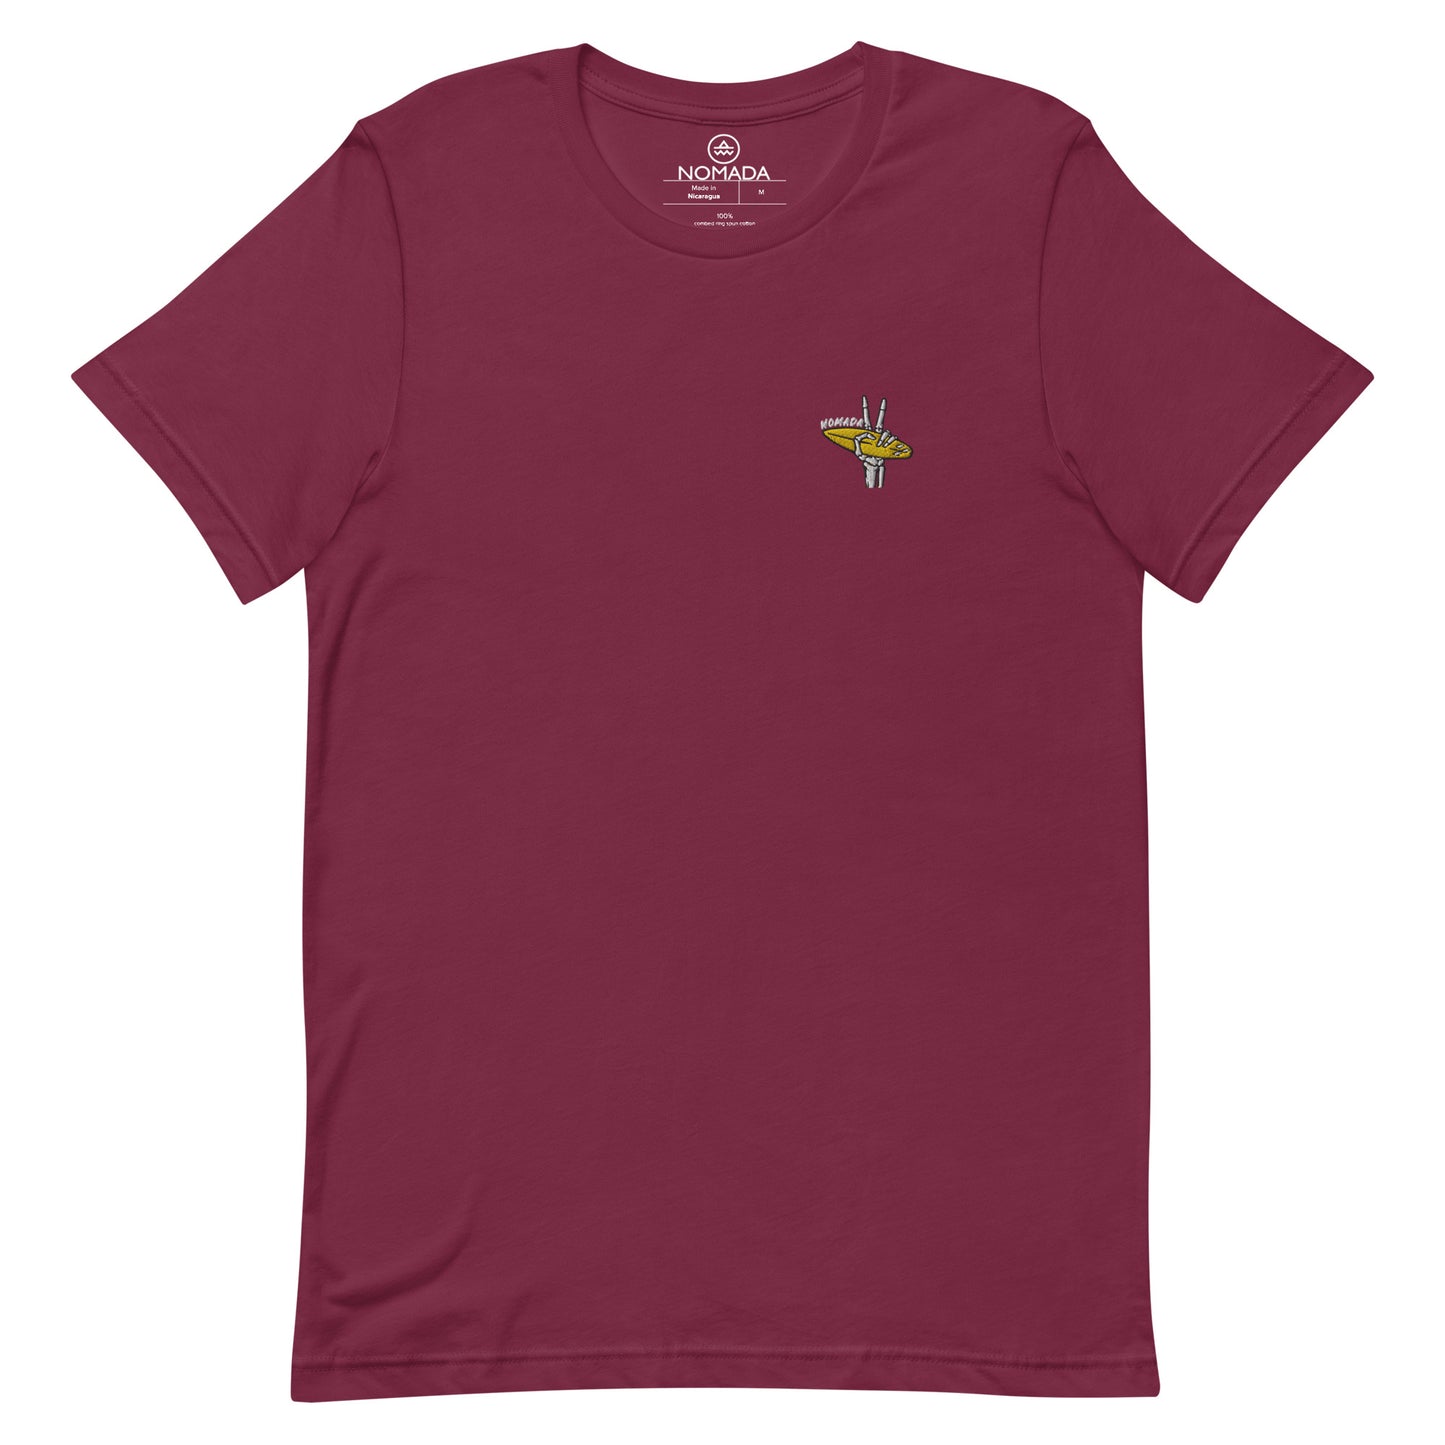 NOMADA Skeleton Hand Showing Peach Sign while holding a Surfboard embroidered T-Shirt, Maroon color shirt